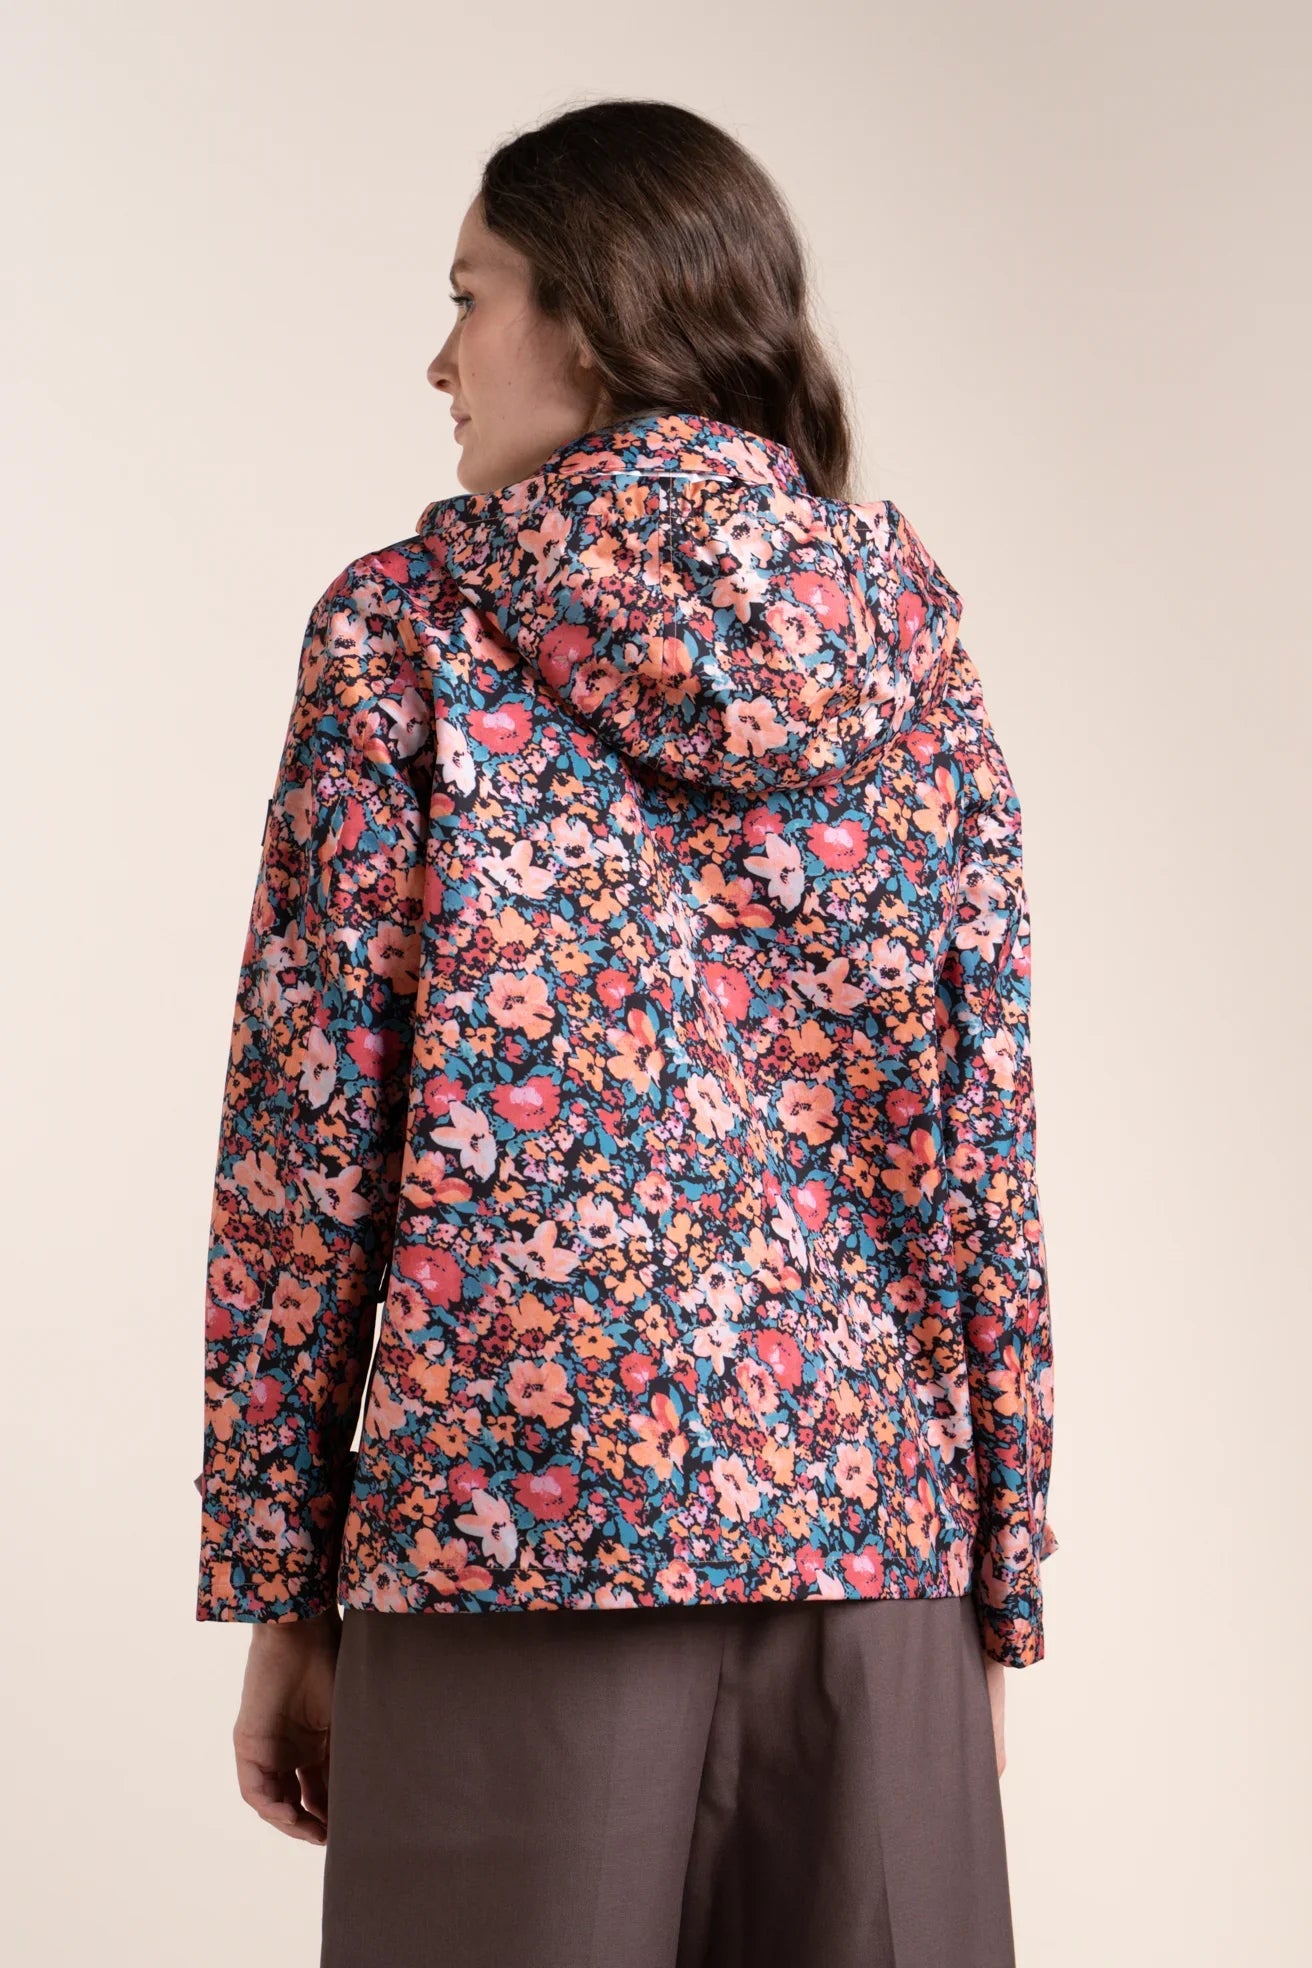 Bonne Nouvelle - Waterproof and windproof jacket Made in France - #couleur_blossom